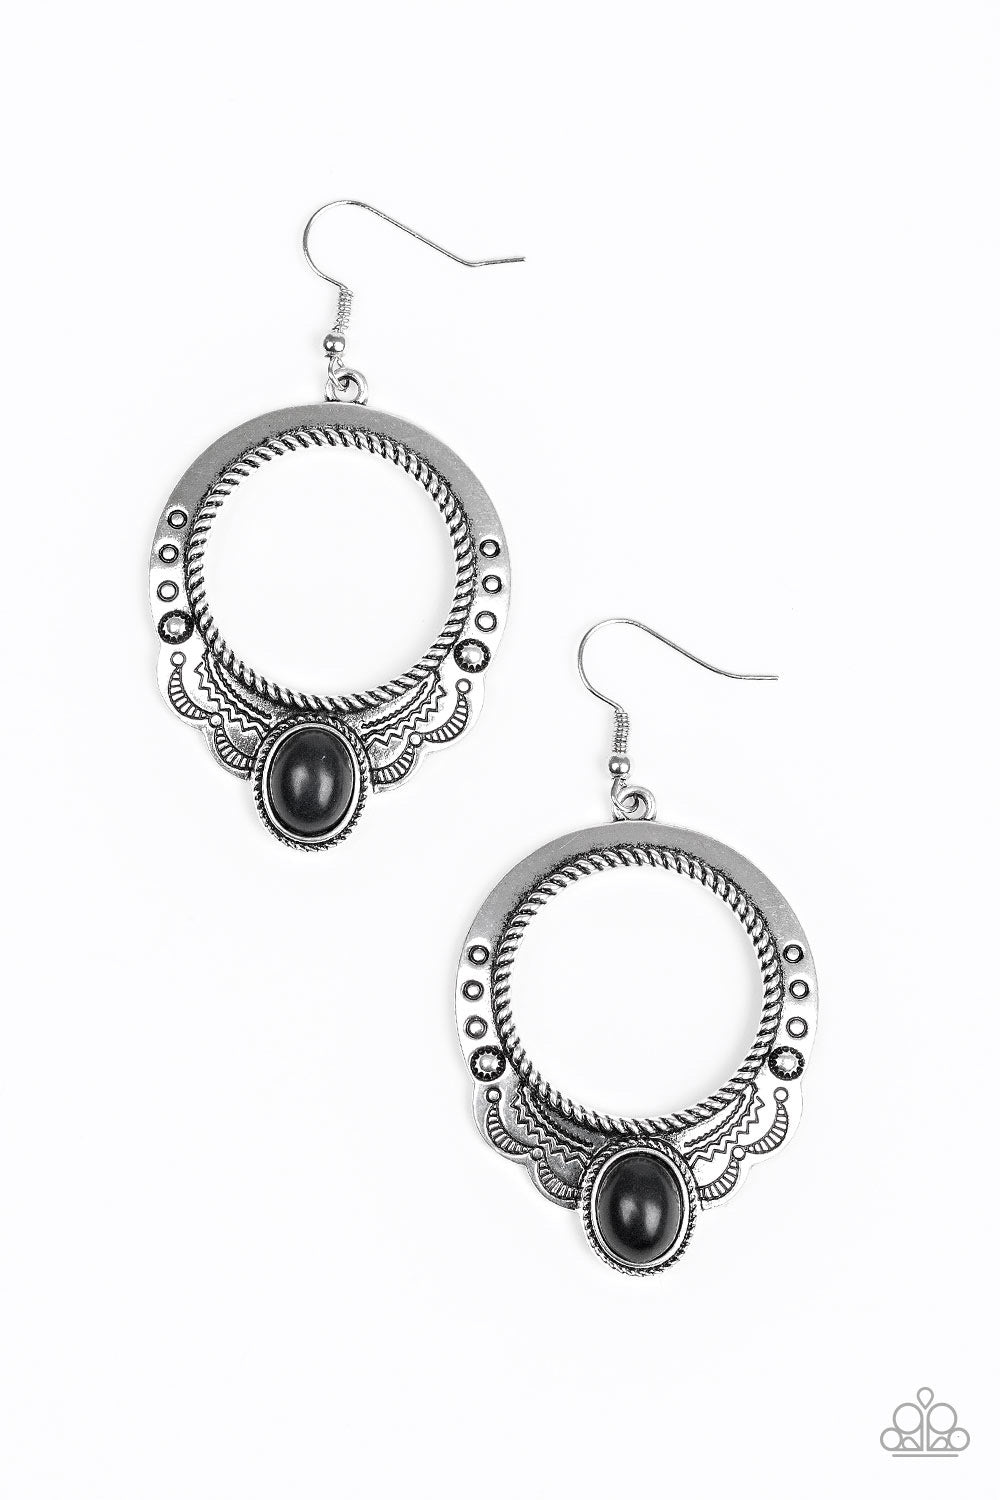 NATURAL SPRINGS - BLACK STONE OVAL SILVER SCALLOPED EARRINGS